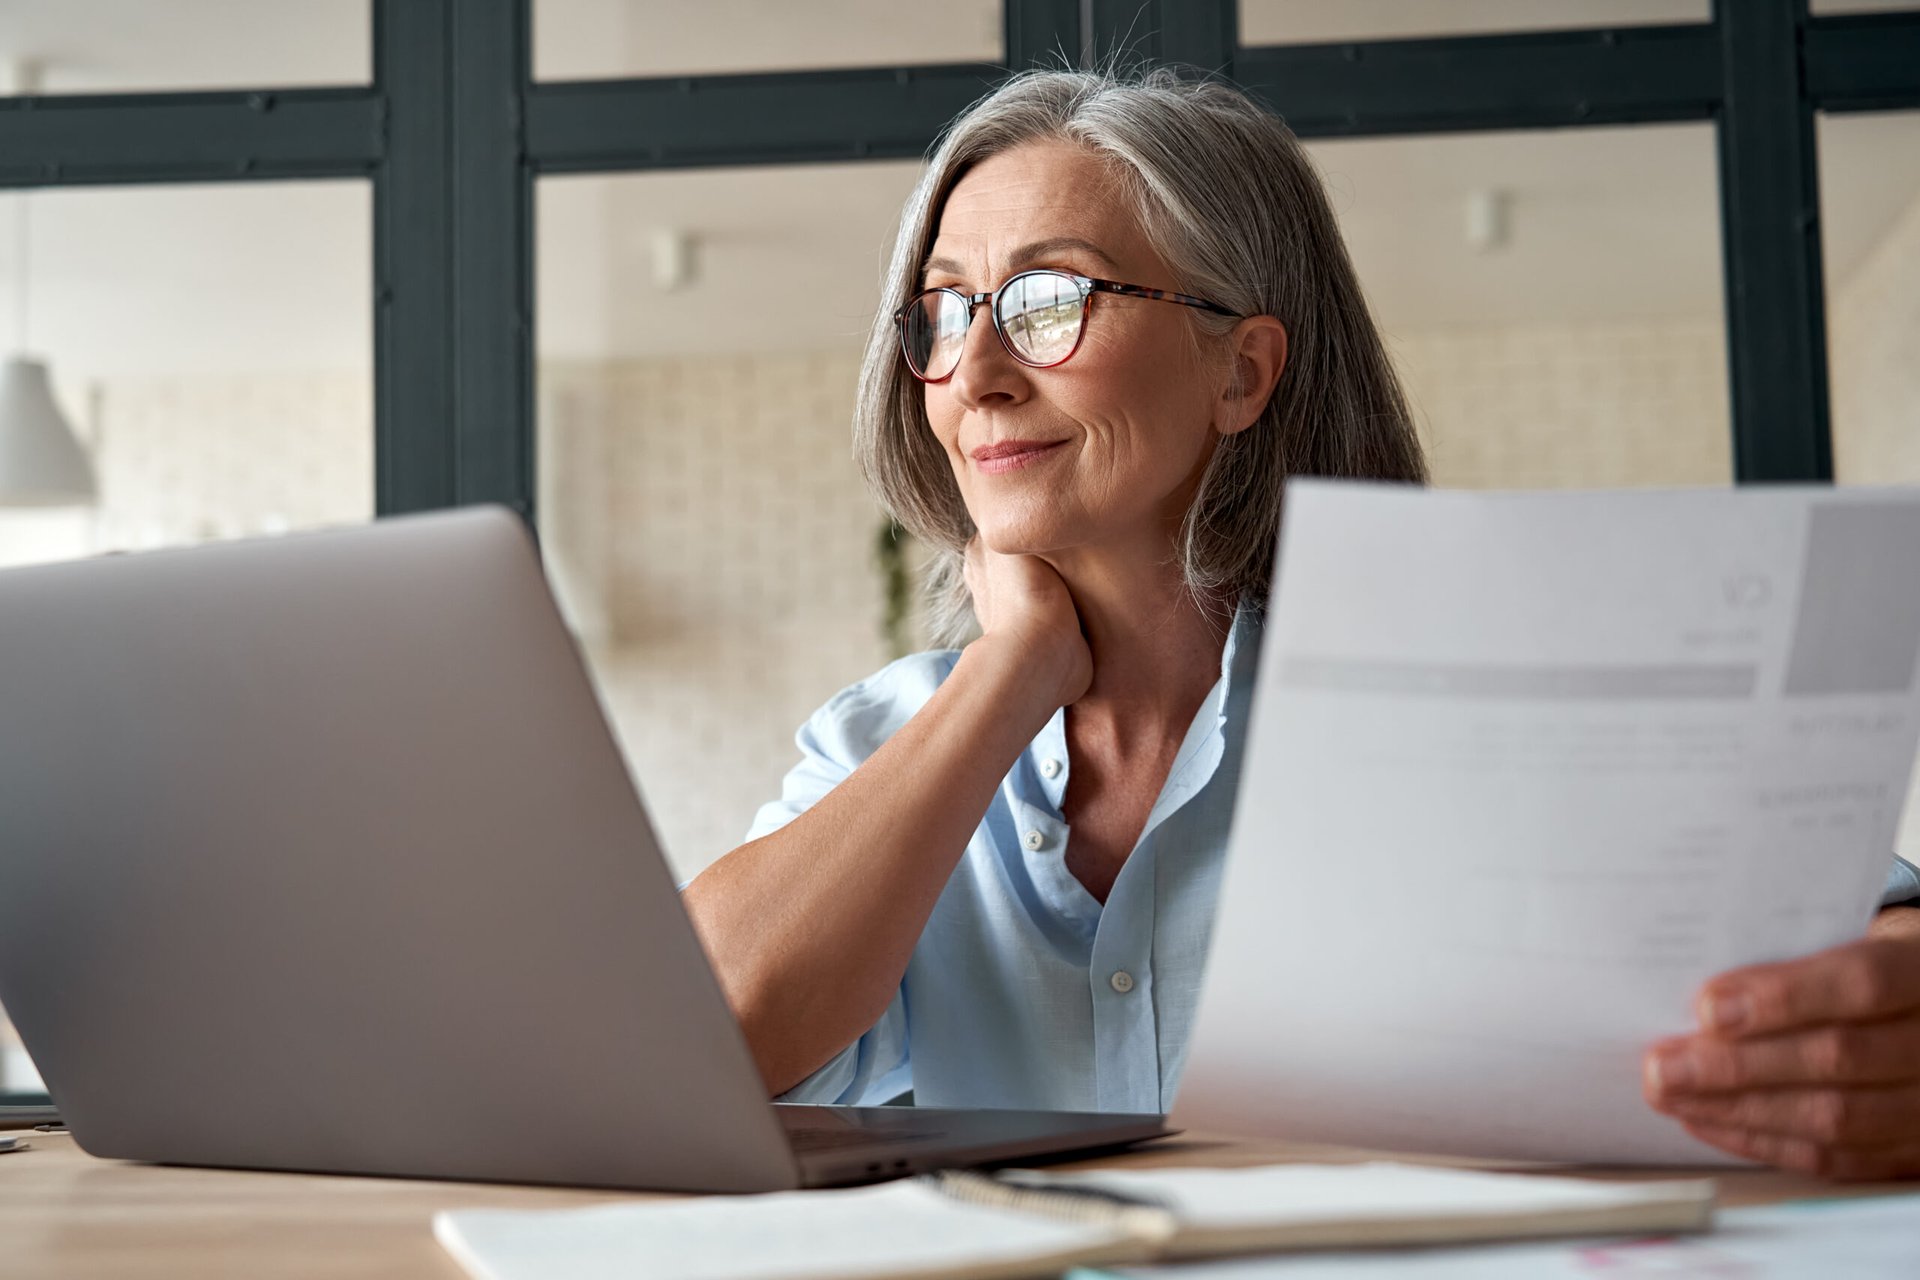 9 Senior Centered Side Hustles To Round Out Your Retirement